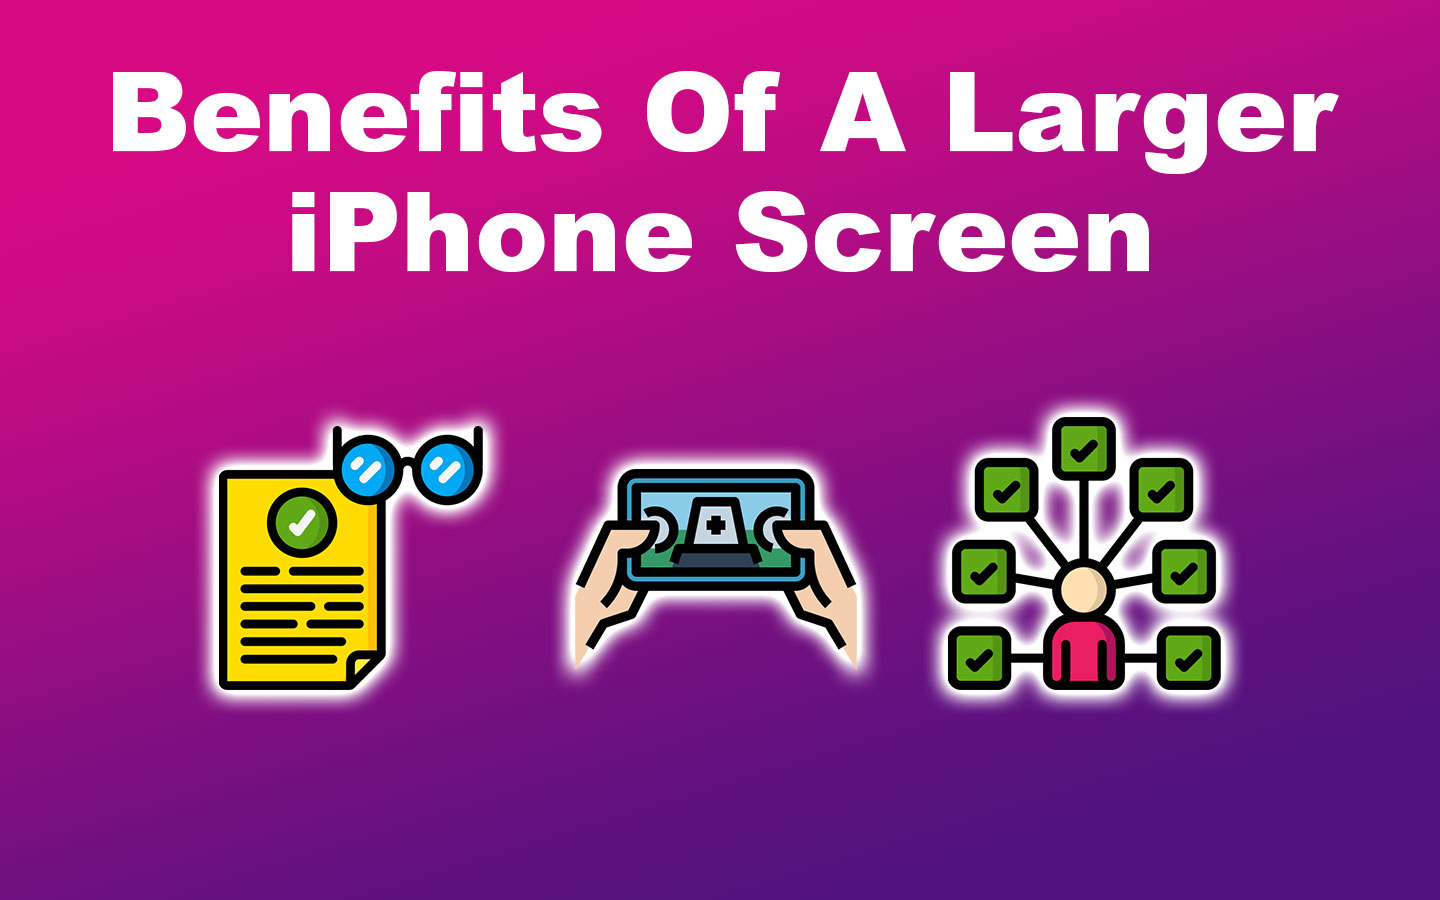 Benefits Of A Larger iPhone Screen